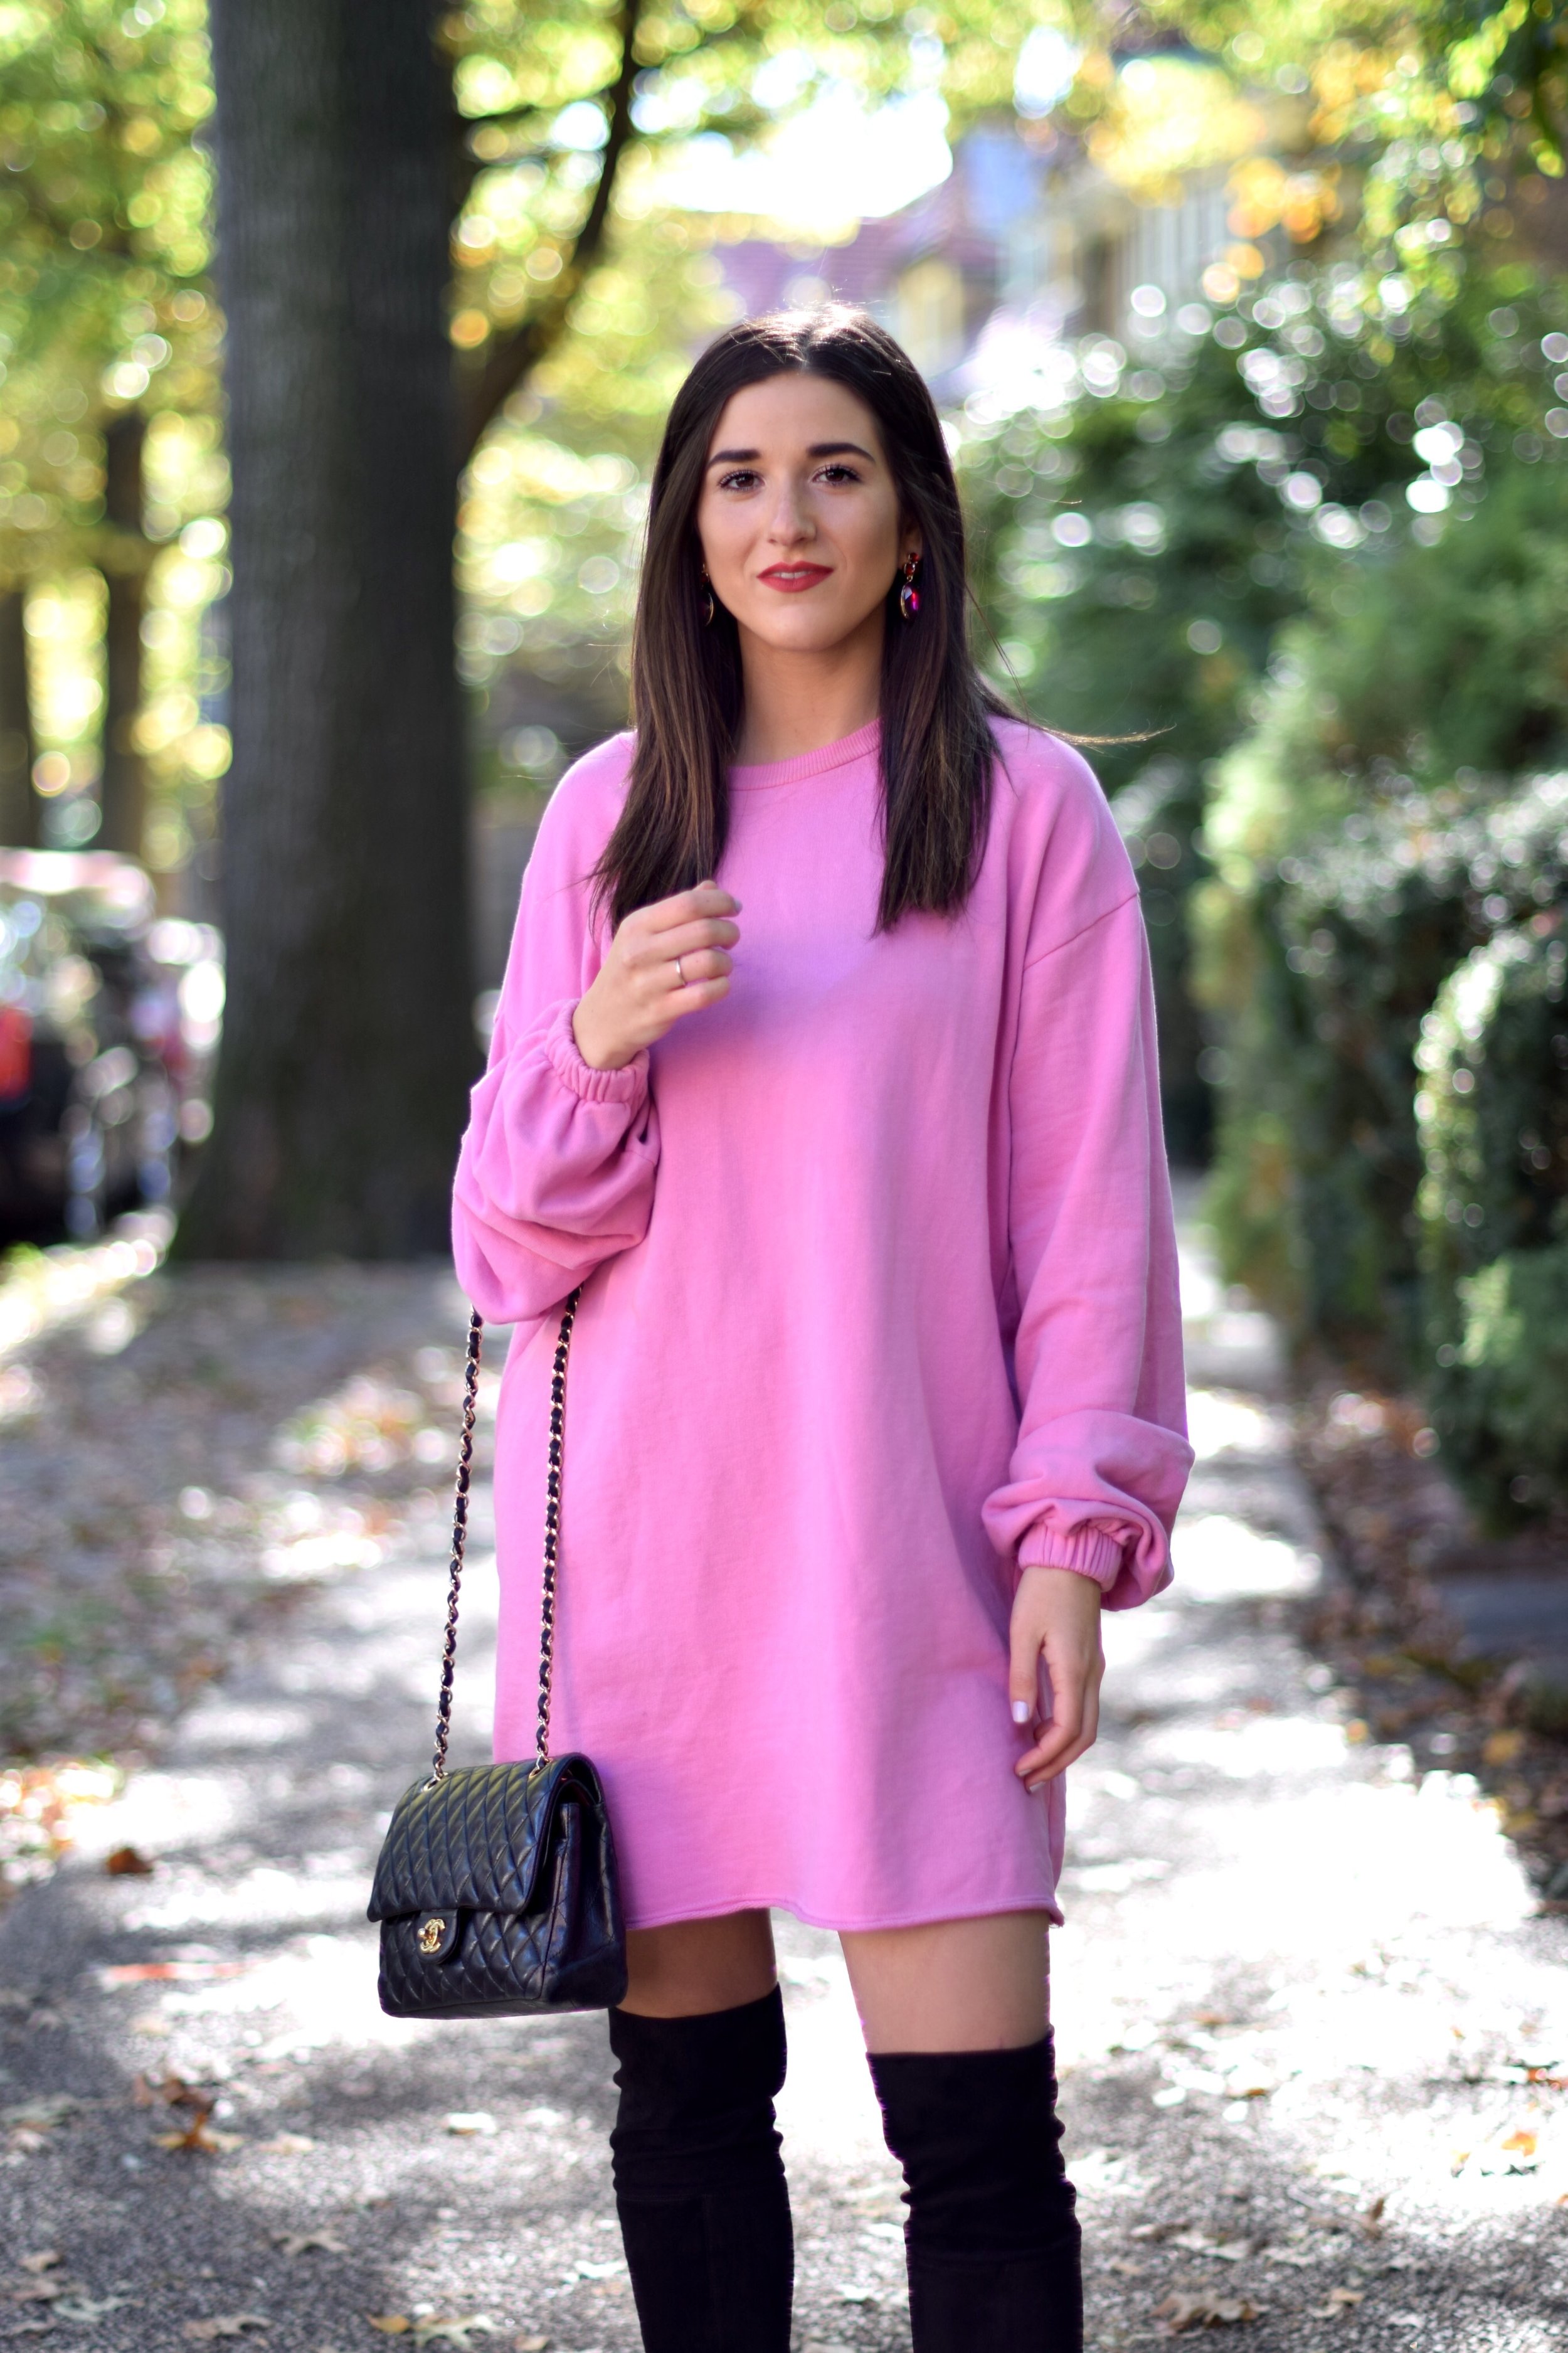 Pink Sweatshirt Dress Black OTK Boots Blogging Before The Days Of Instagram Esther Santer Fashion Blog NYC Street Style Blogger Outfit OOTD Trendy Over The Knee Hair Girl Women New York Chanel Bag Designer ASOS Pretty Shopping Sale Beautiful  Winter.jpg